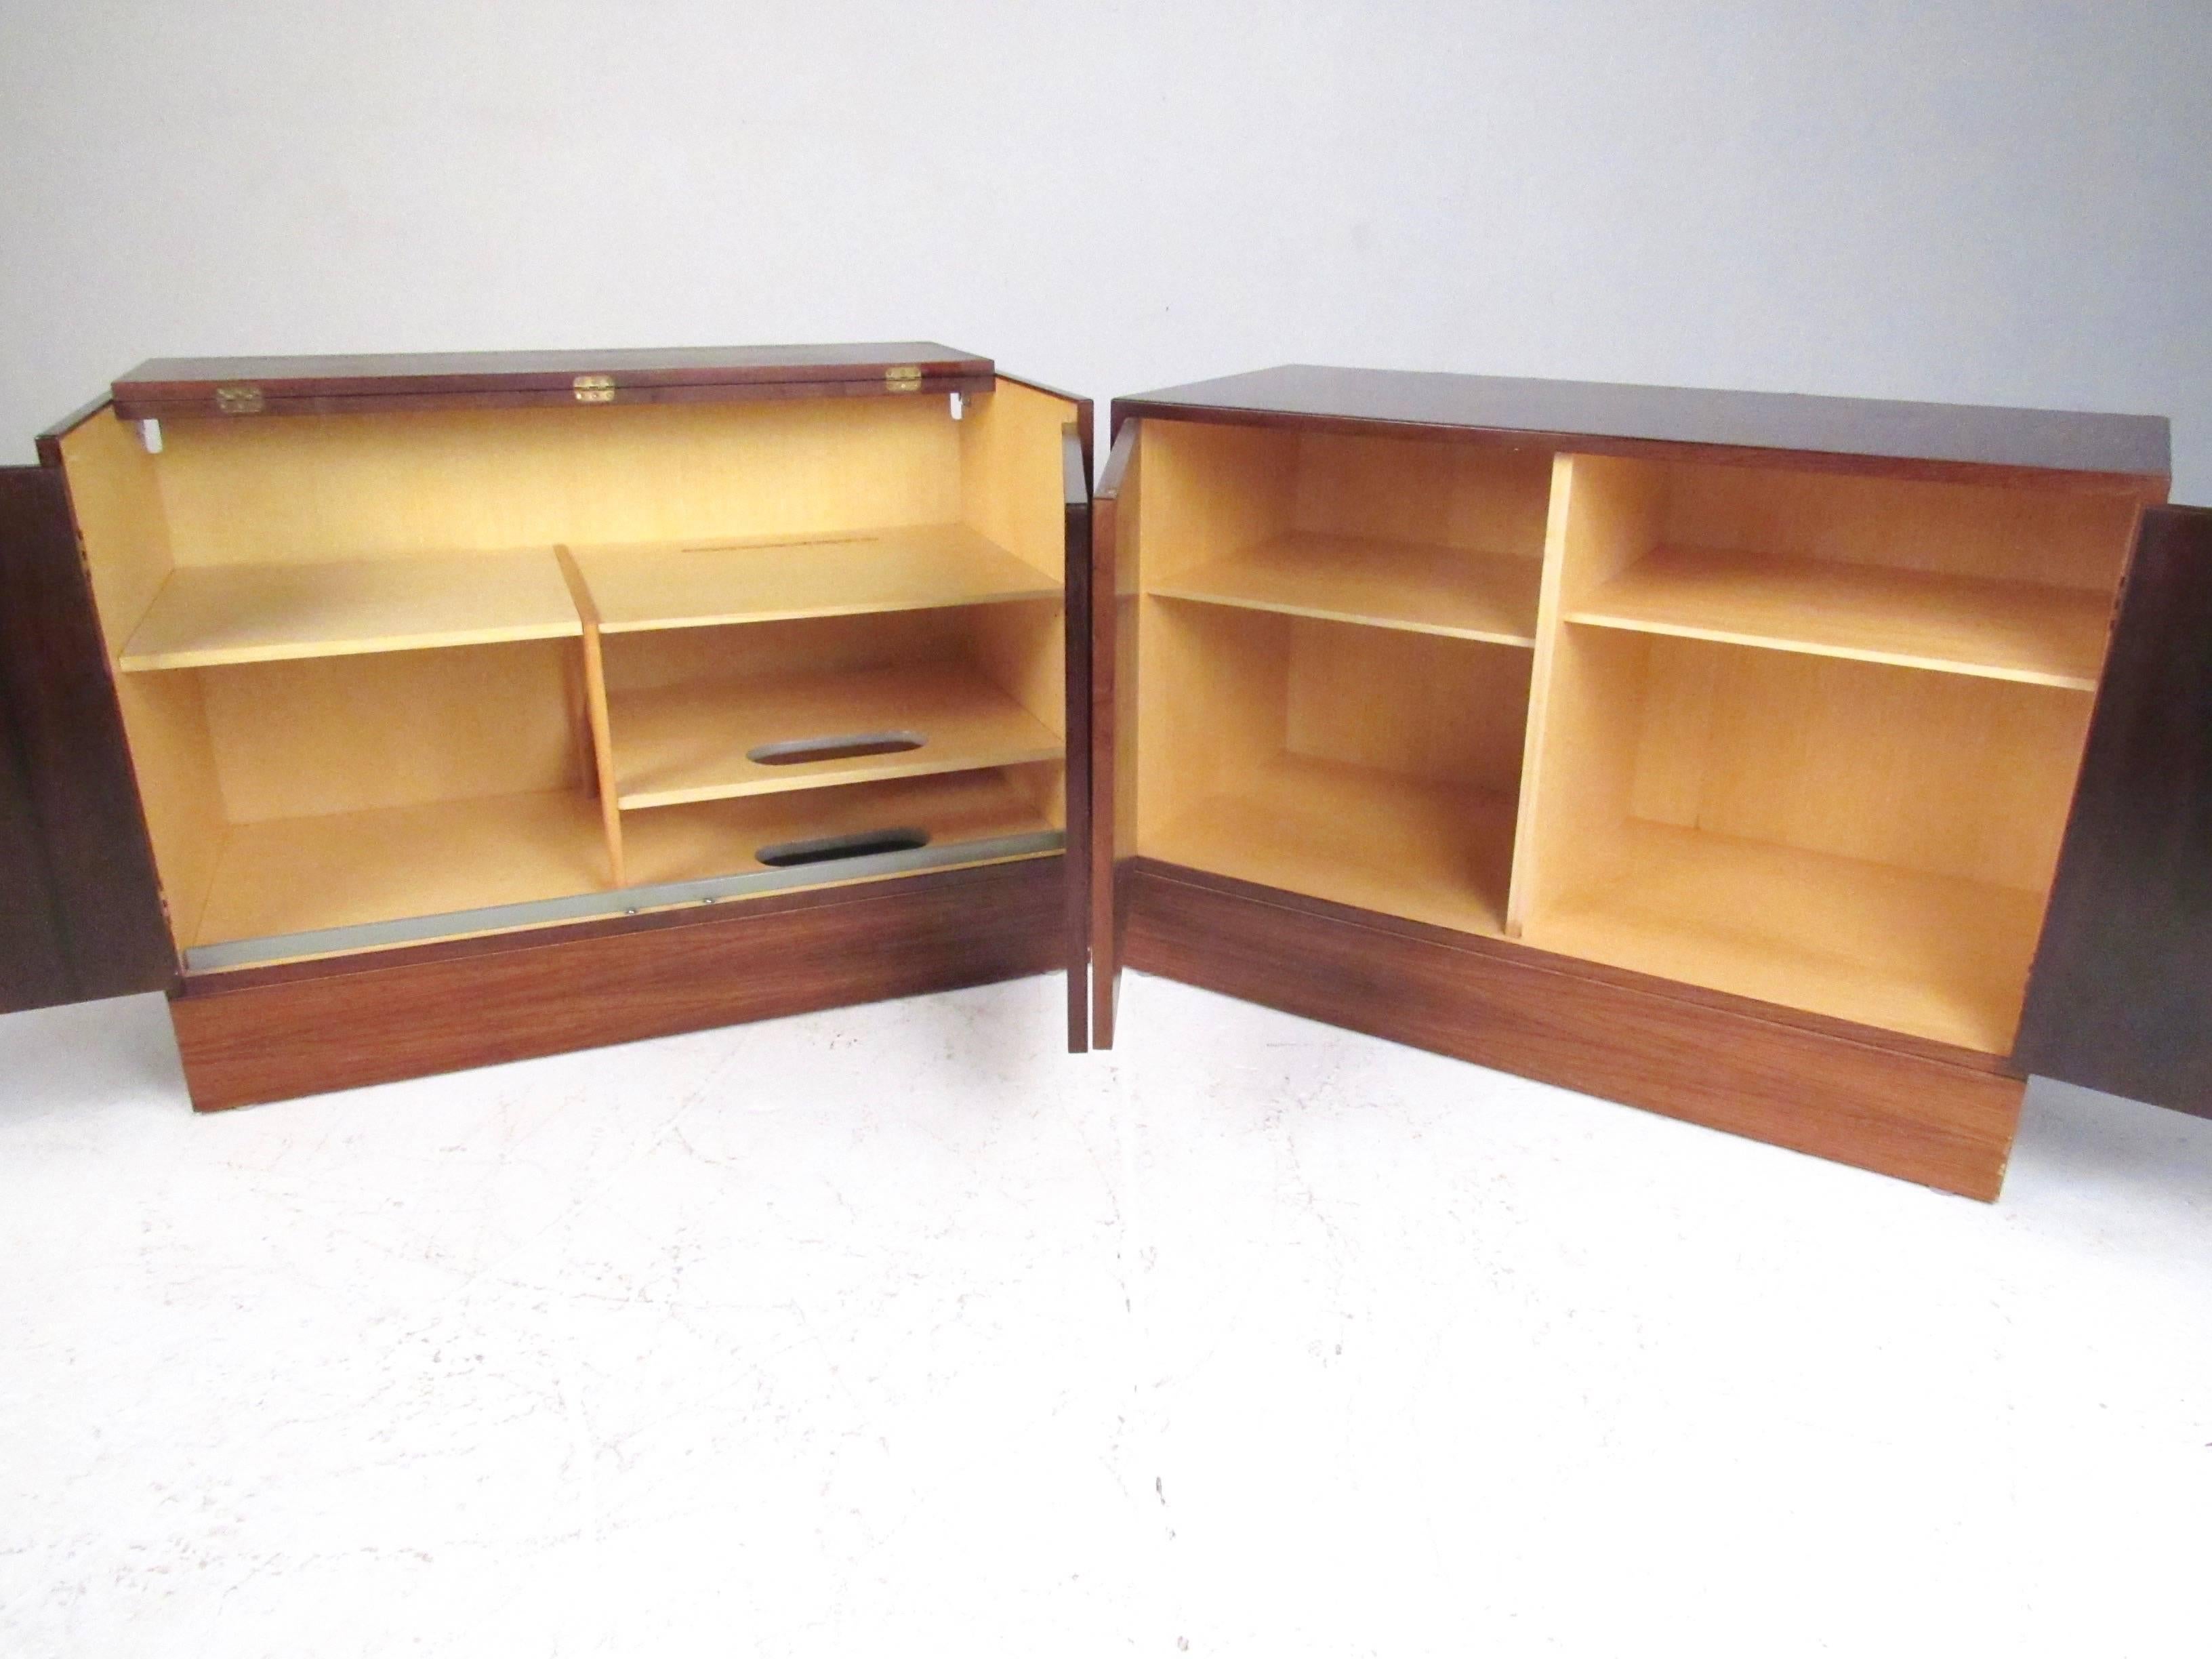 This exquisite pair of vintage modern cabinets feature a rich rosewood finish, beech interiors, and spacious storage options for any interior. Unique array of adjustable shelves and compartments, complete with cutaways for wiring. Carved door pulls